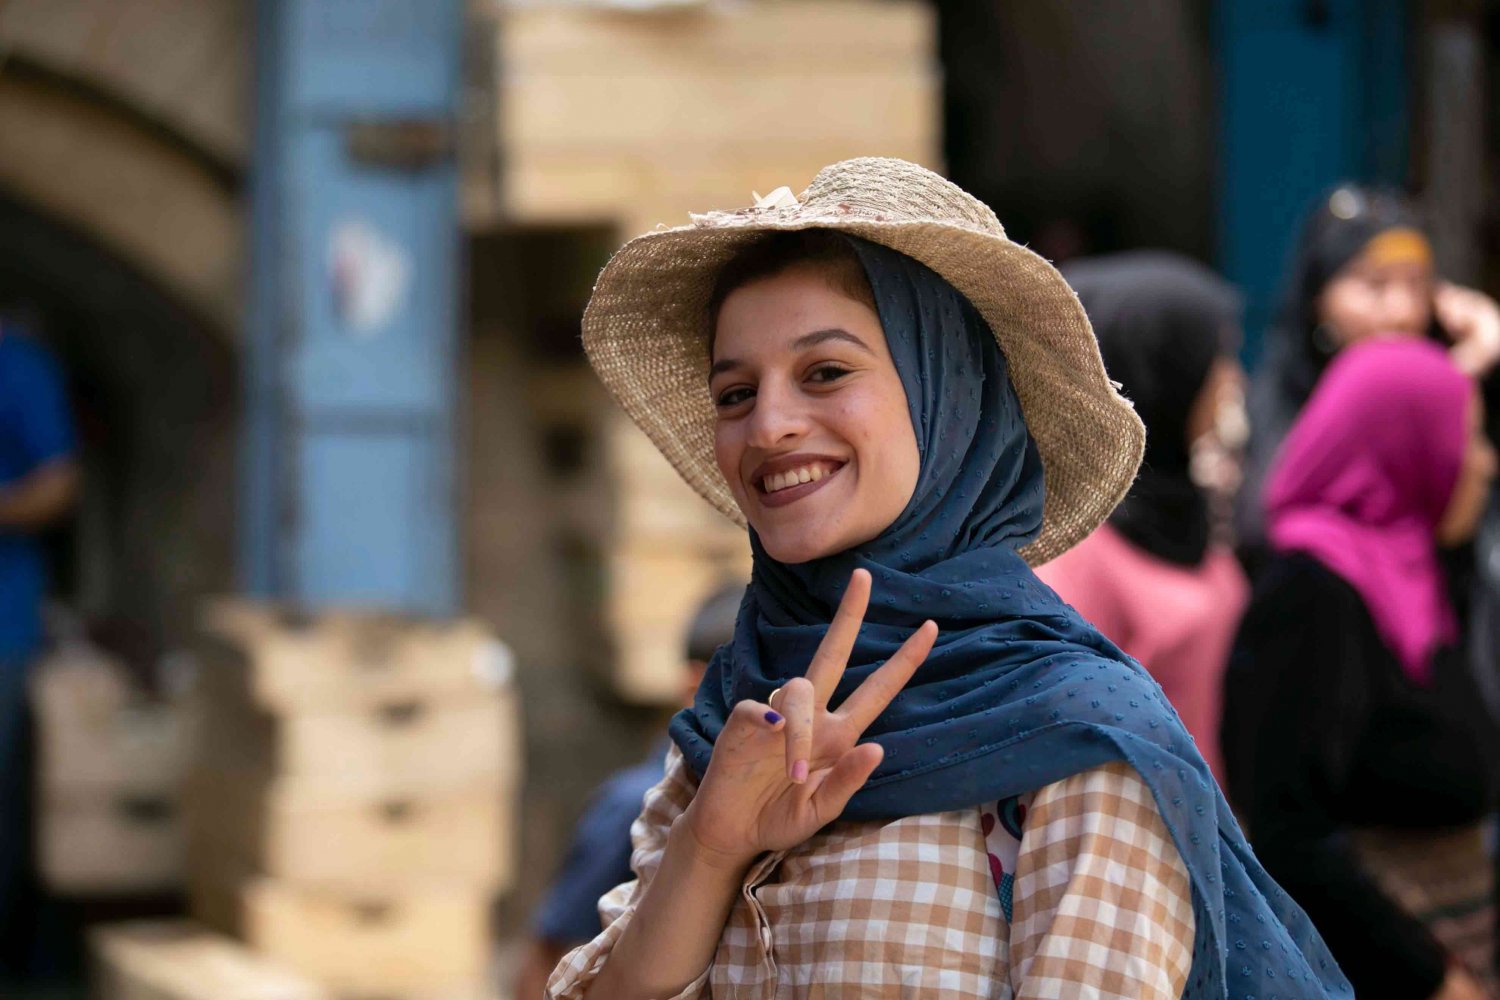 A woman flashes a victory sign as she passes by in the Old City of Jerusalem, 2021